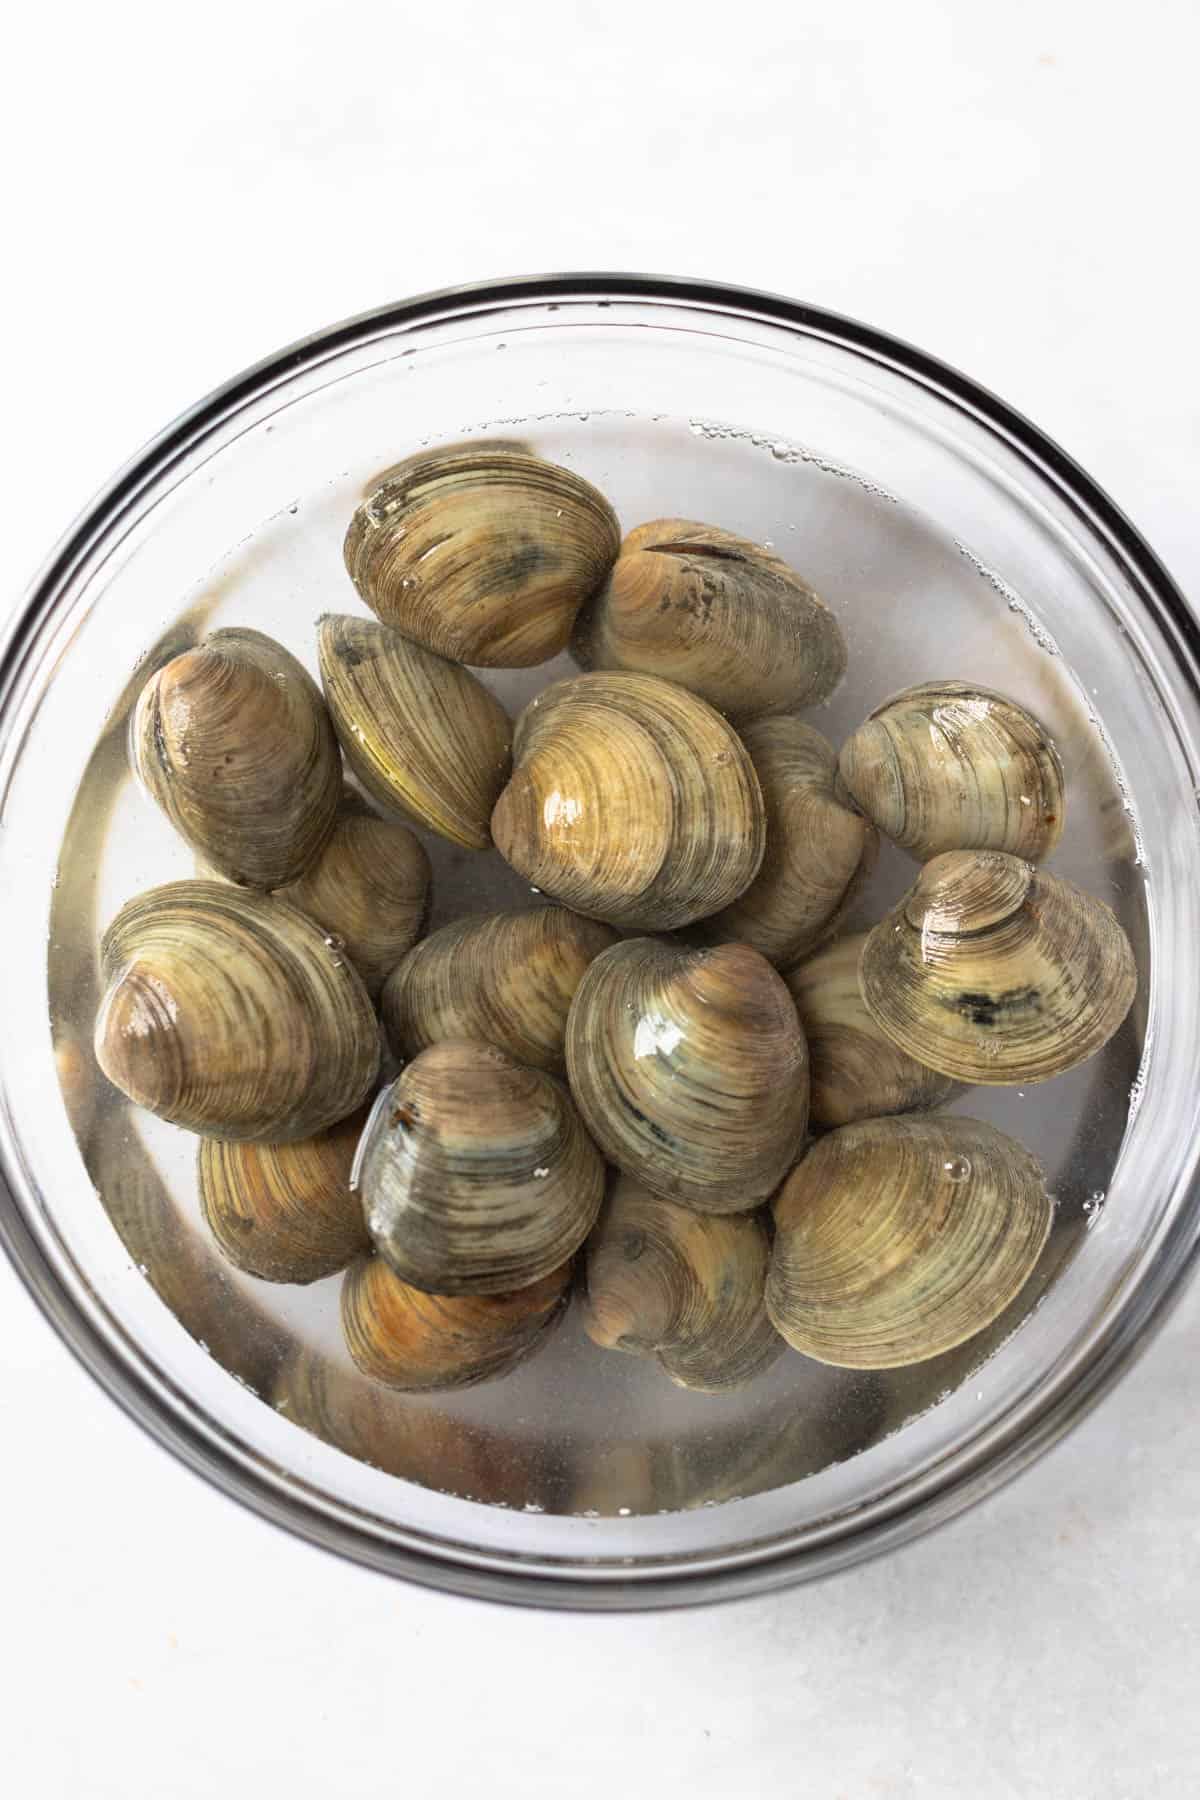 littleneck clams in a bowl of salted water